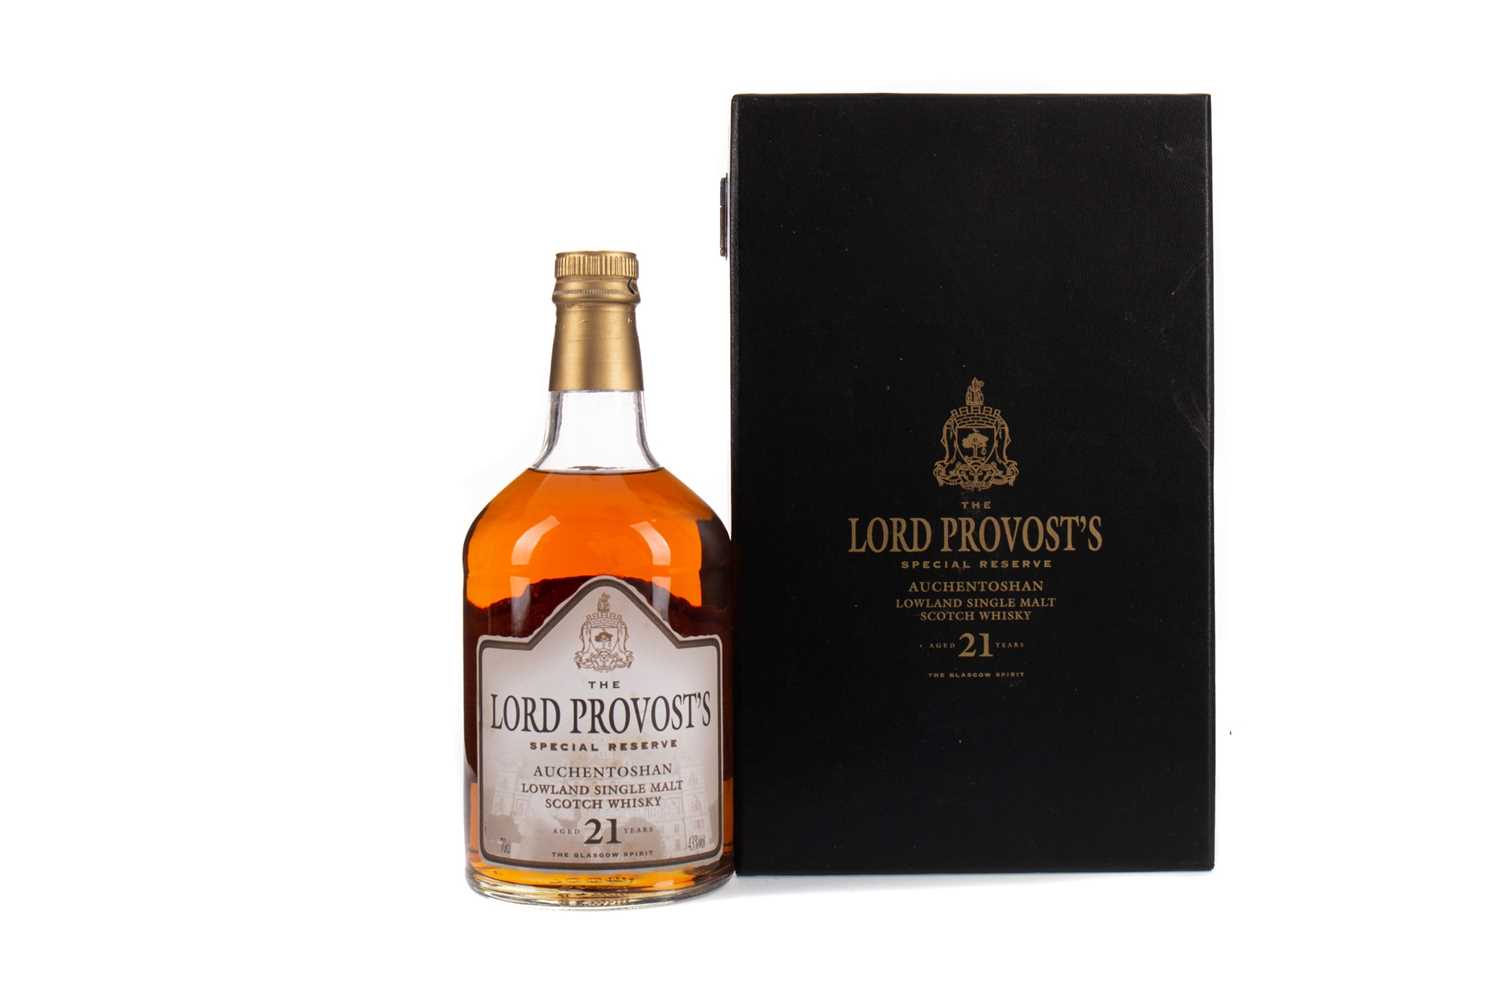 Lot 185 - AUCHENTOSHAN LORD PROVEST'S SPECIAL RESERVE AGED 21 YEARS